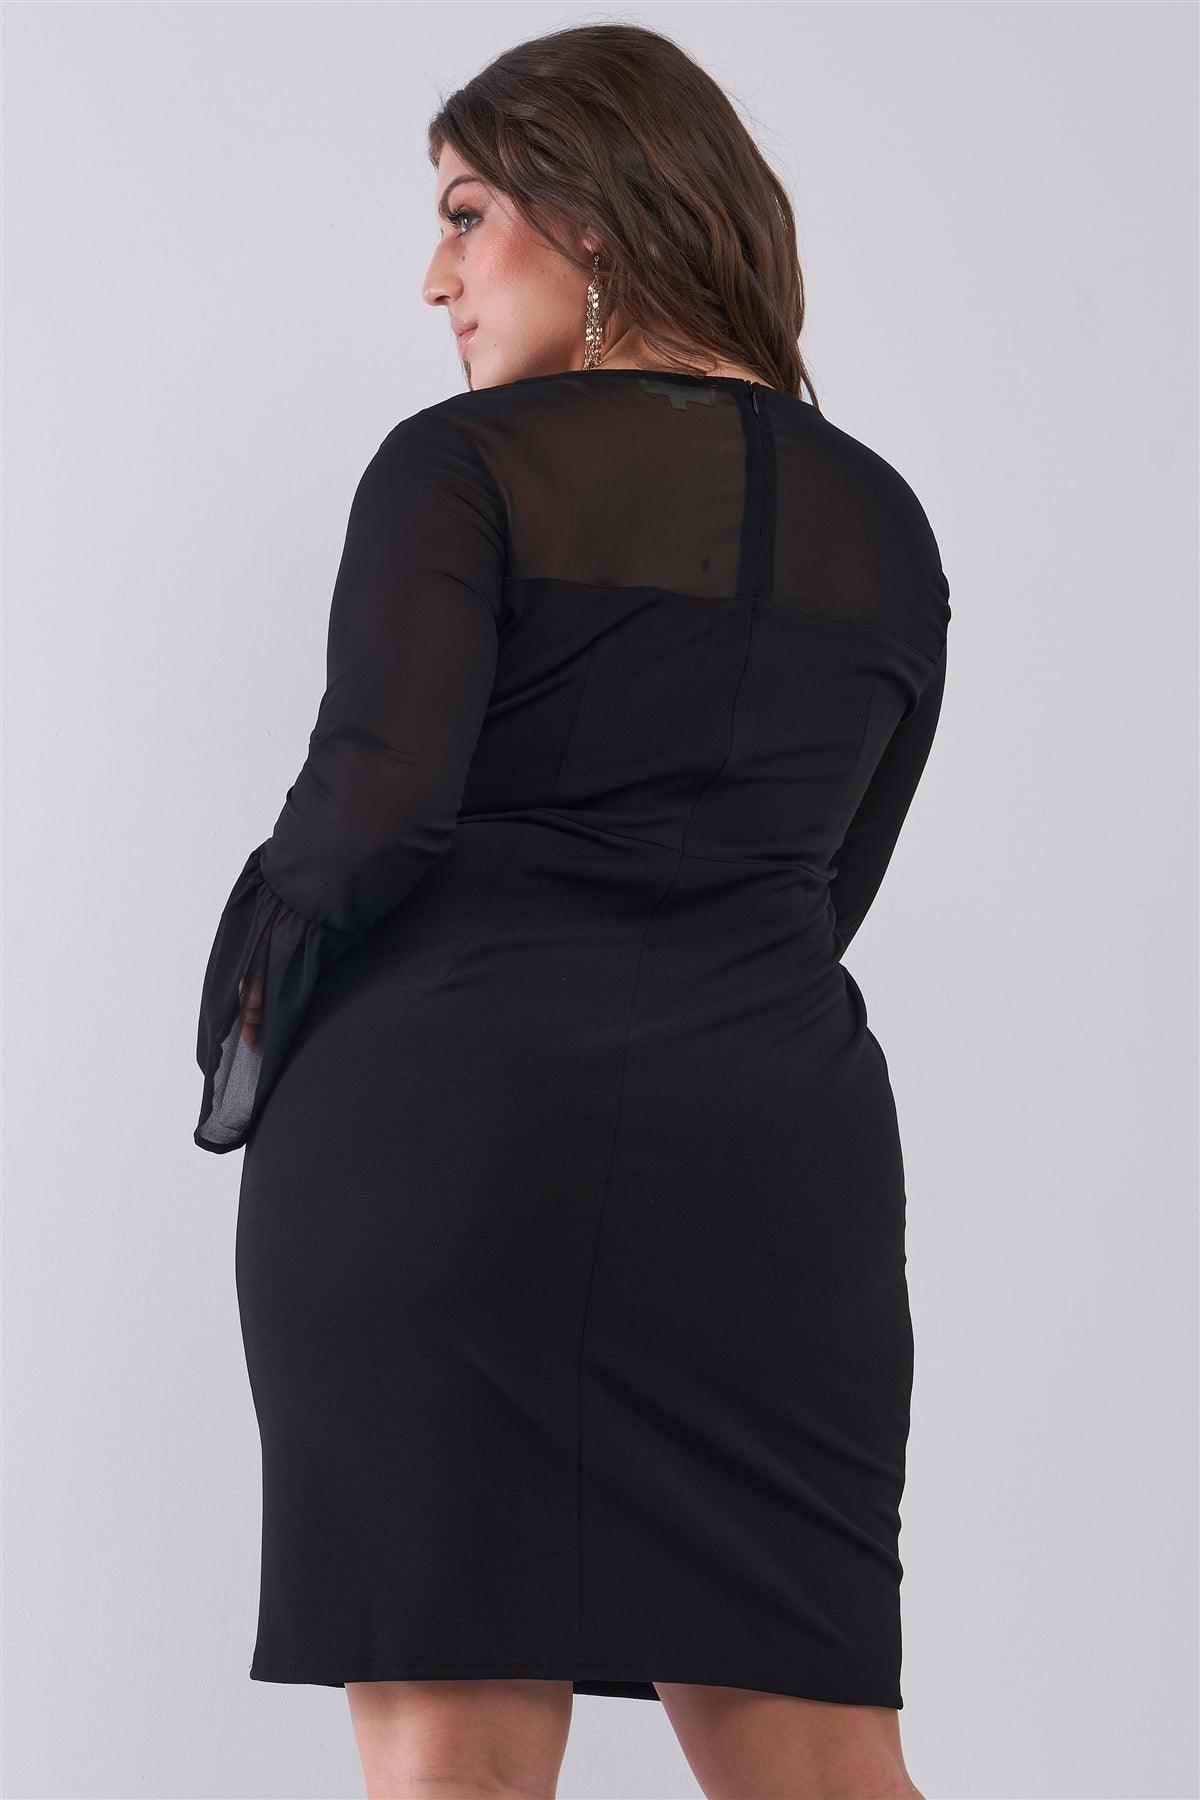 Junior Plus Size Classy Black Round Neck Flared Sheer Mesh Sleeve Detail Structured Tight Mini Dress /1-3-2